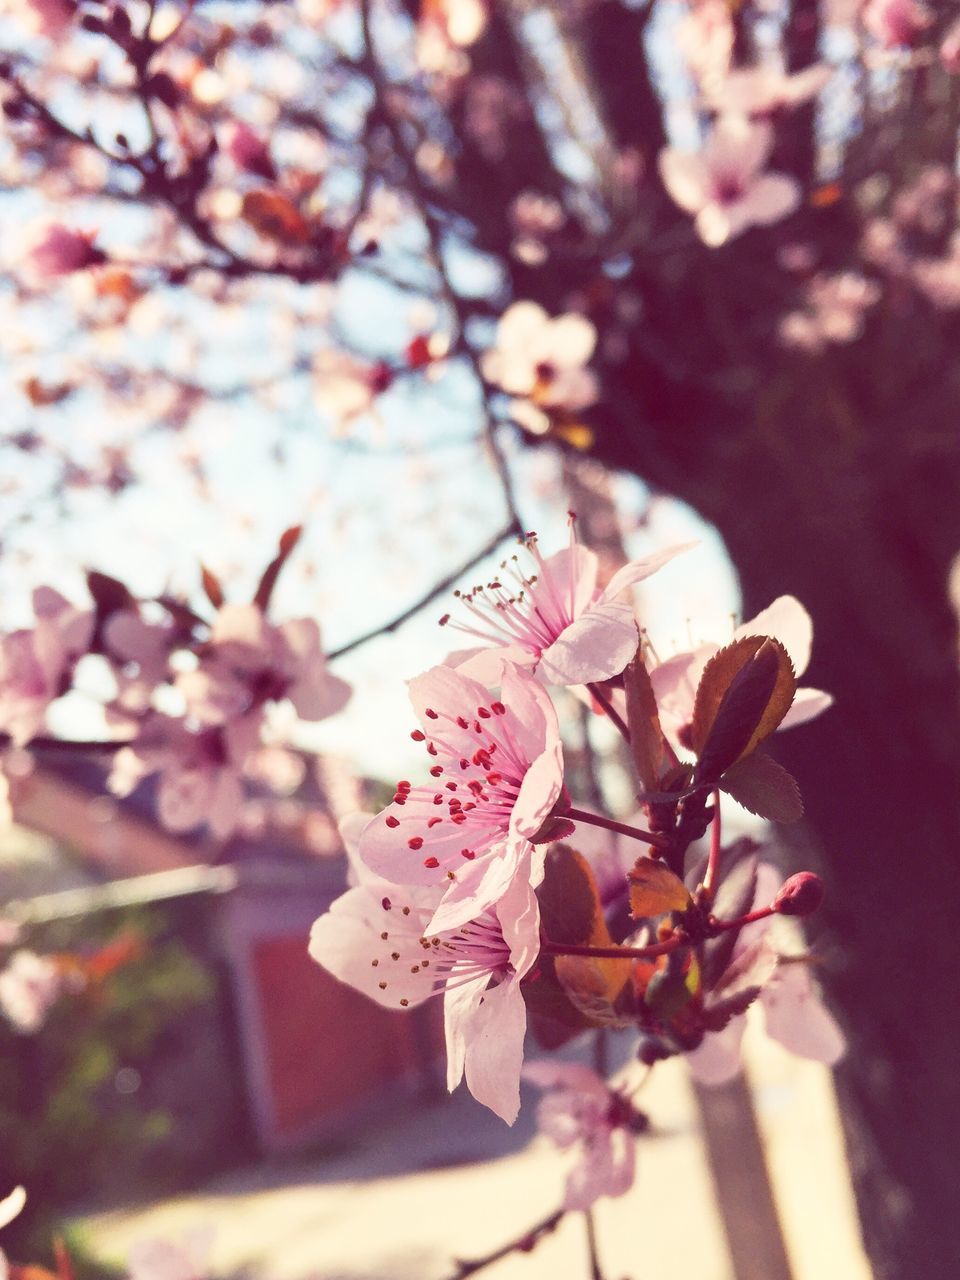 freshness, flower, fragility, growth, beauty in nature, branch, petal, springtime, close-up, nature, cherry blossom, focus on foreground, in bloom, tree, blossom, botany, fruit tree, season, flower head, twig, orchard, cherry tree, pink color, selective focus, day, blooming, apple blossom, pollen, pistil, no people